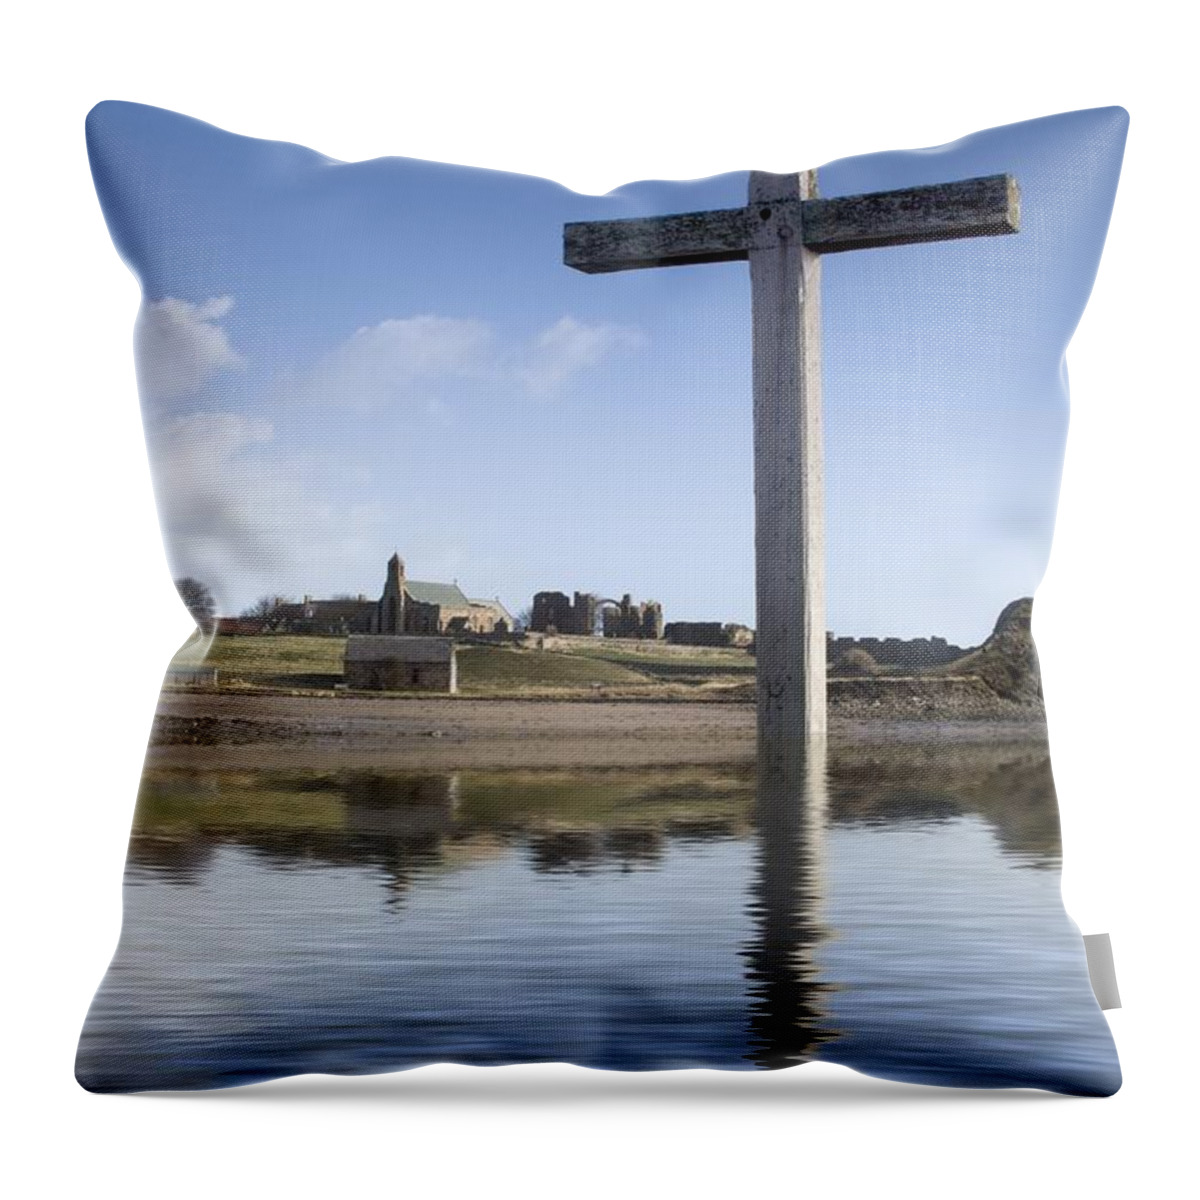 Calm Throw Pillow featuring the photograph Cross In Water, Bewick, England by John Short